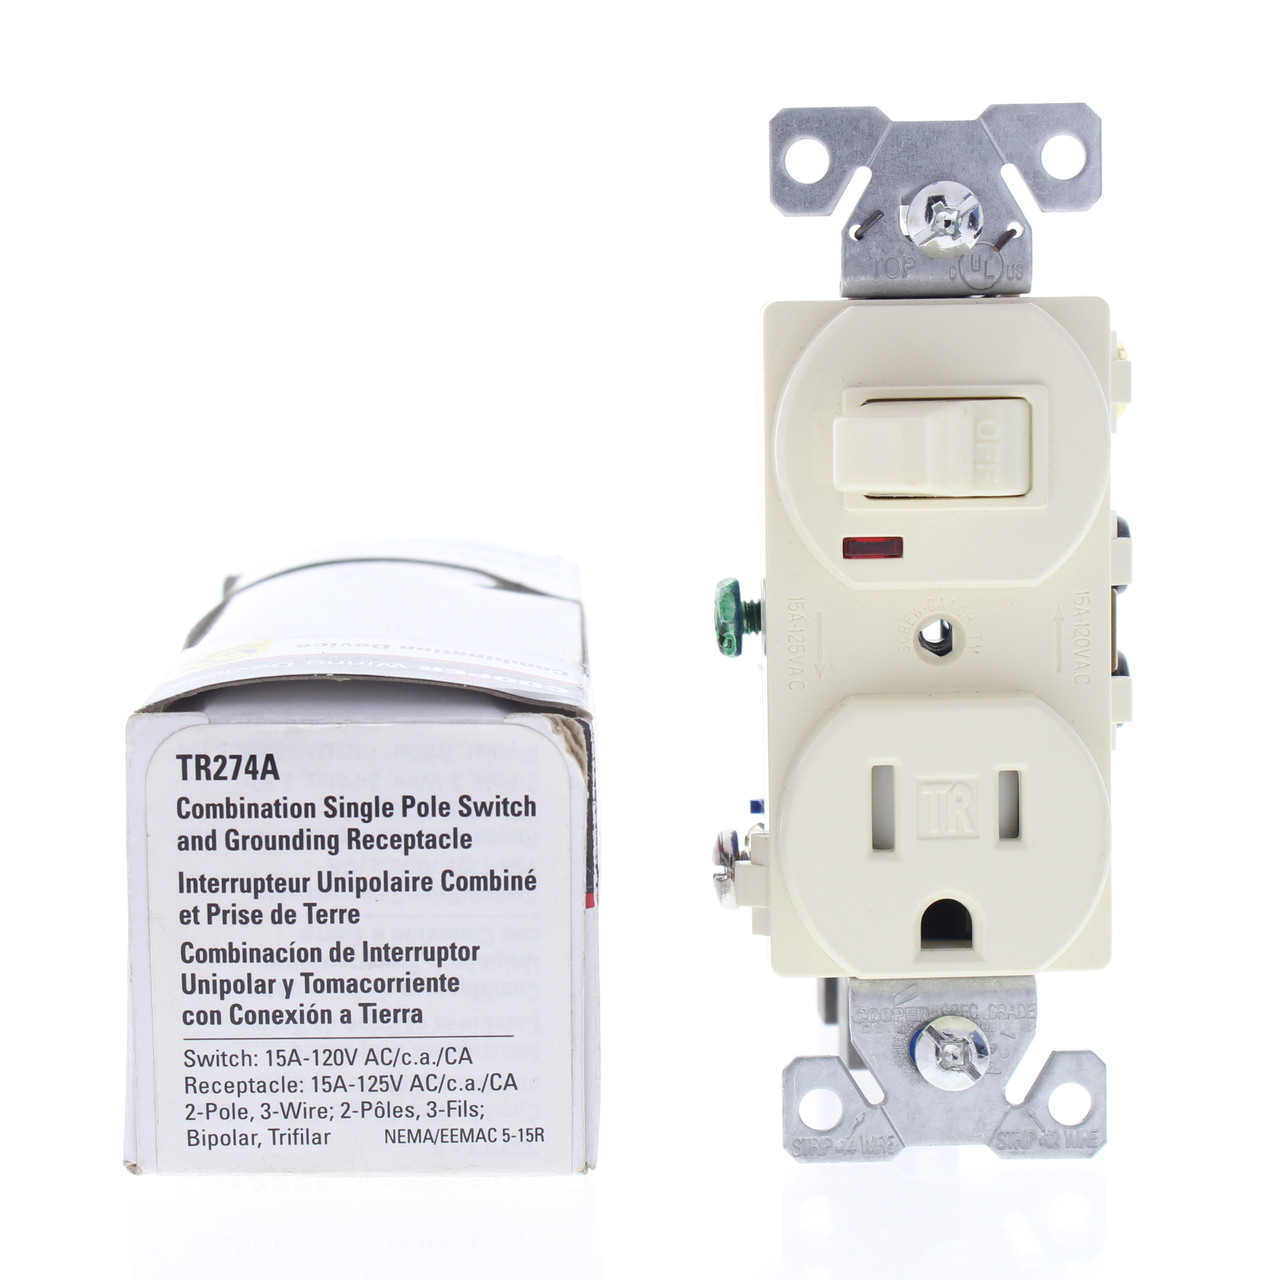 🏠 🔌 Cooper Almond Tamper Resistant Toggle Light Switch Outlet Receptacle  15A TR274A - In Stock - Fruit Ridge Tools